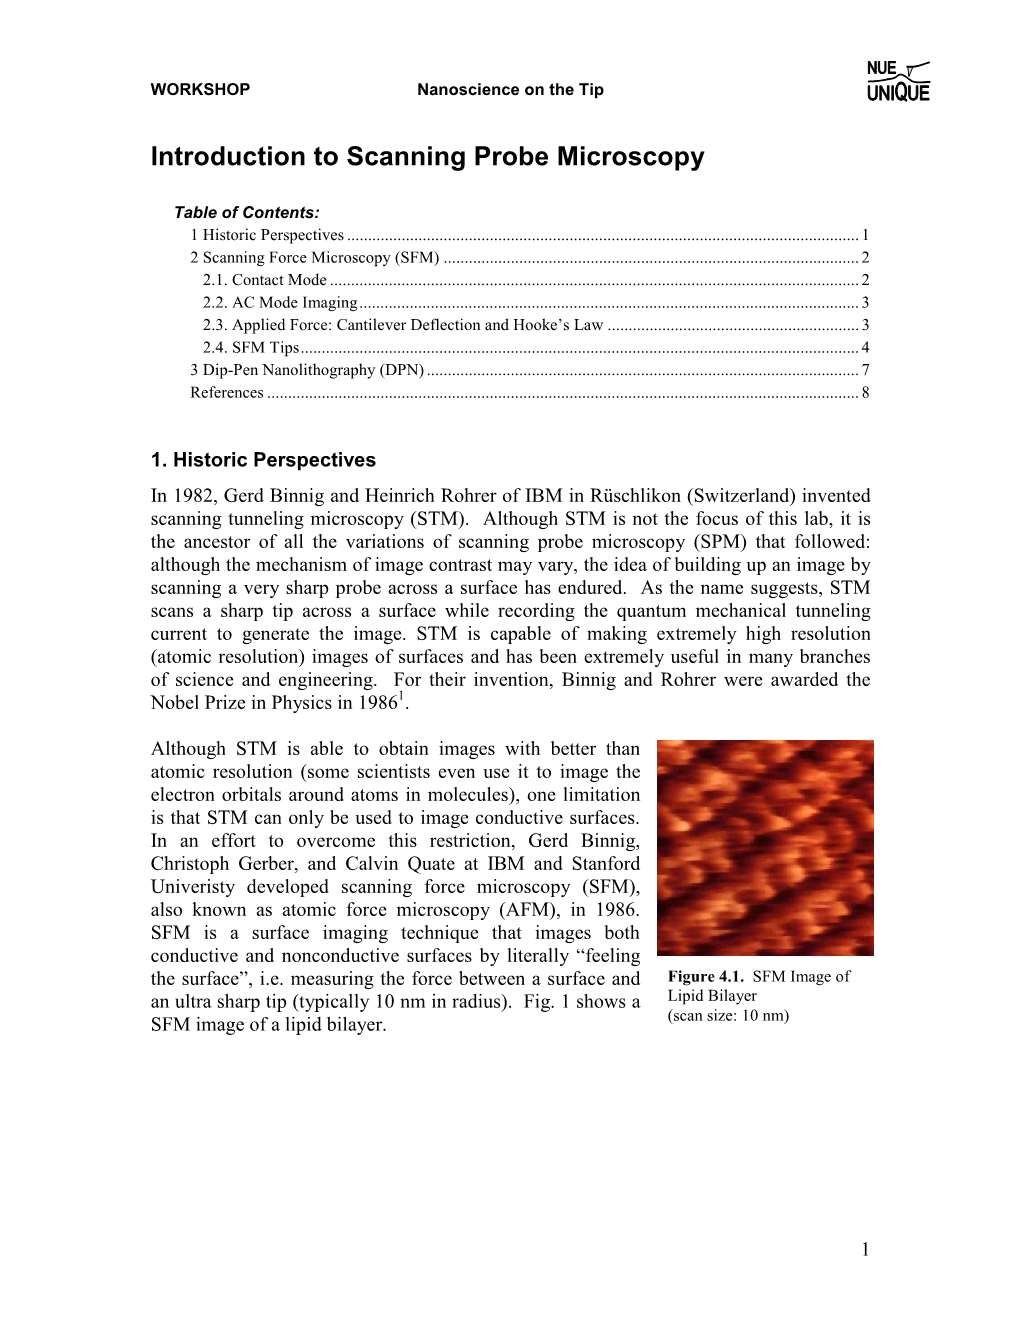 Introduction to Scanning Probe Microscopy